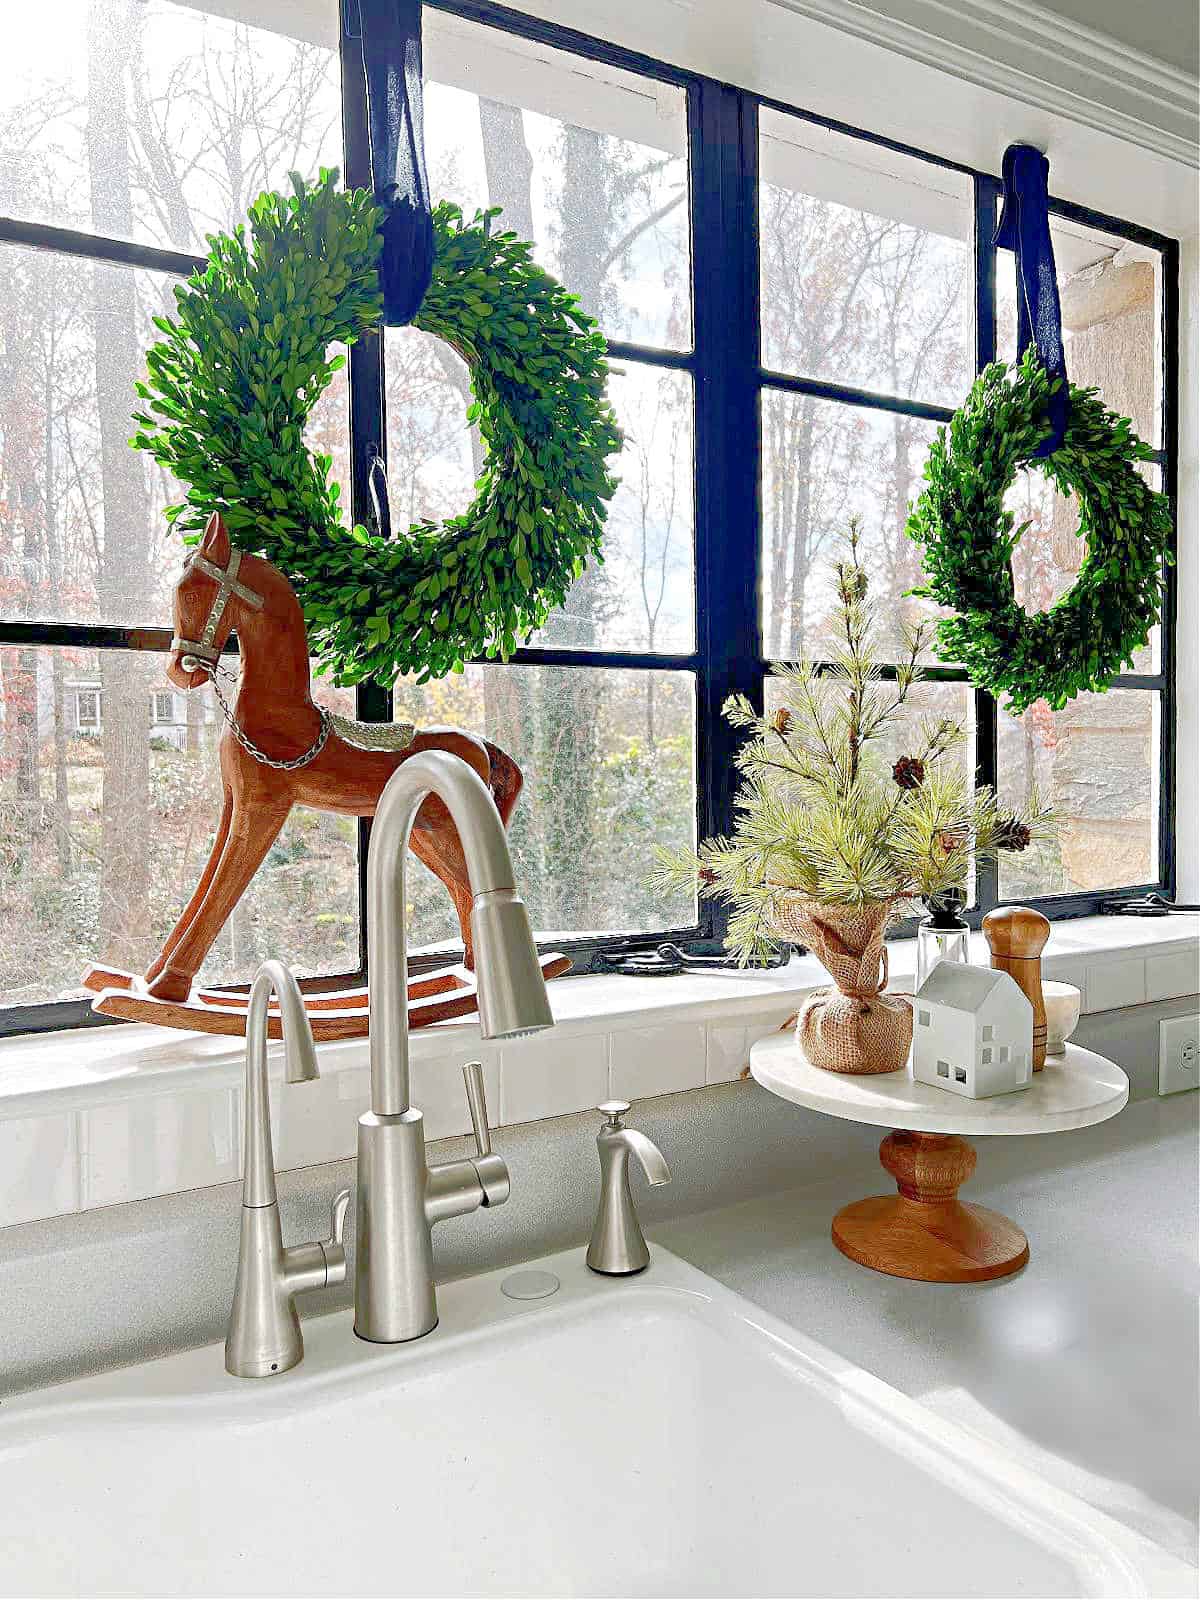 kitchen windowsill with wood rocking forse and window wreaths